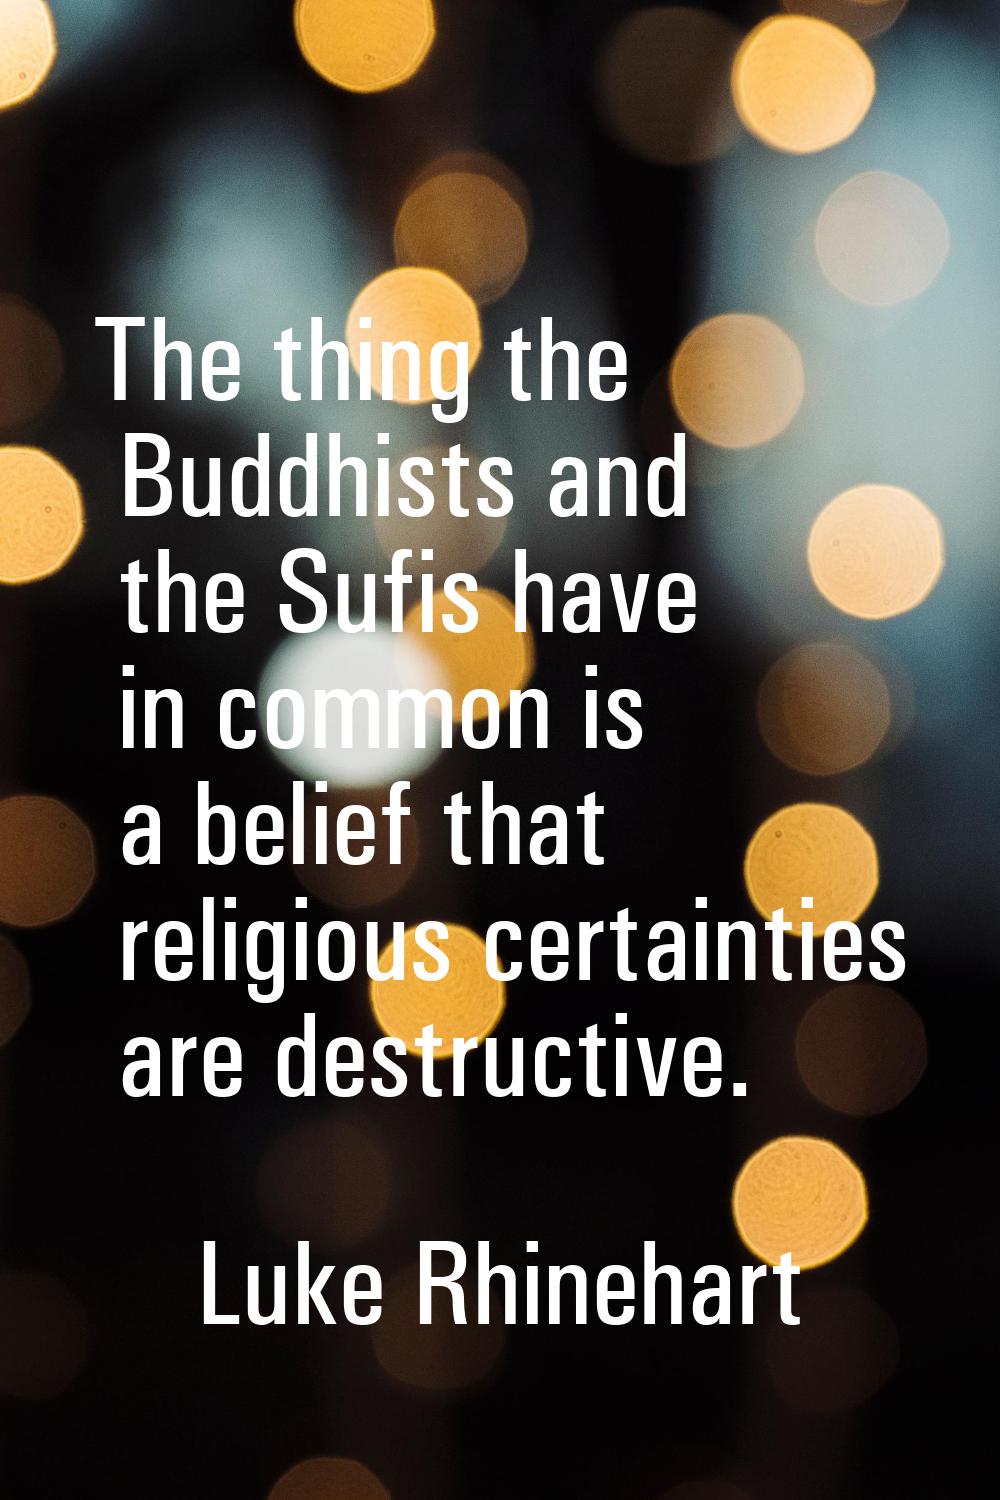 The thing the Buddhists and the Sufis have in common is a belief that religious certainties are des